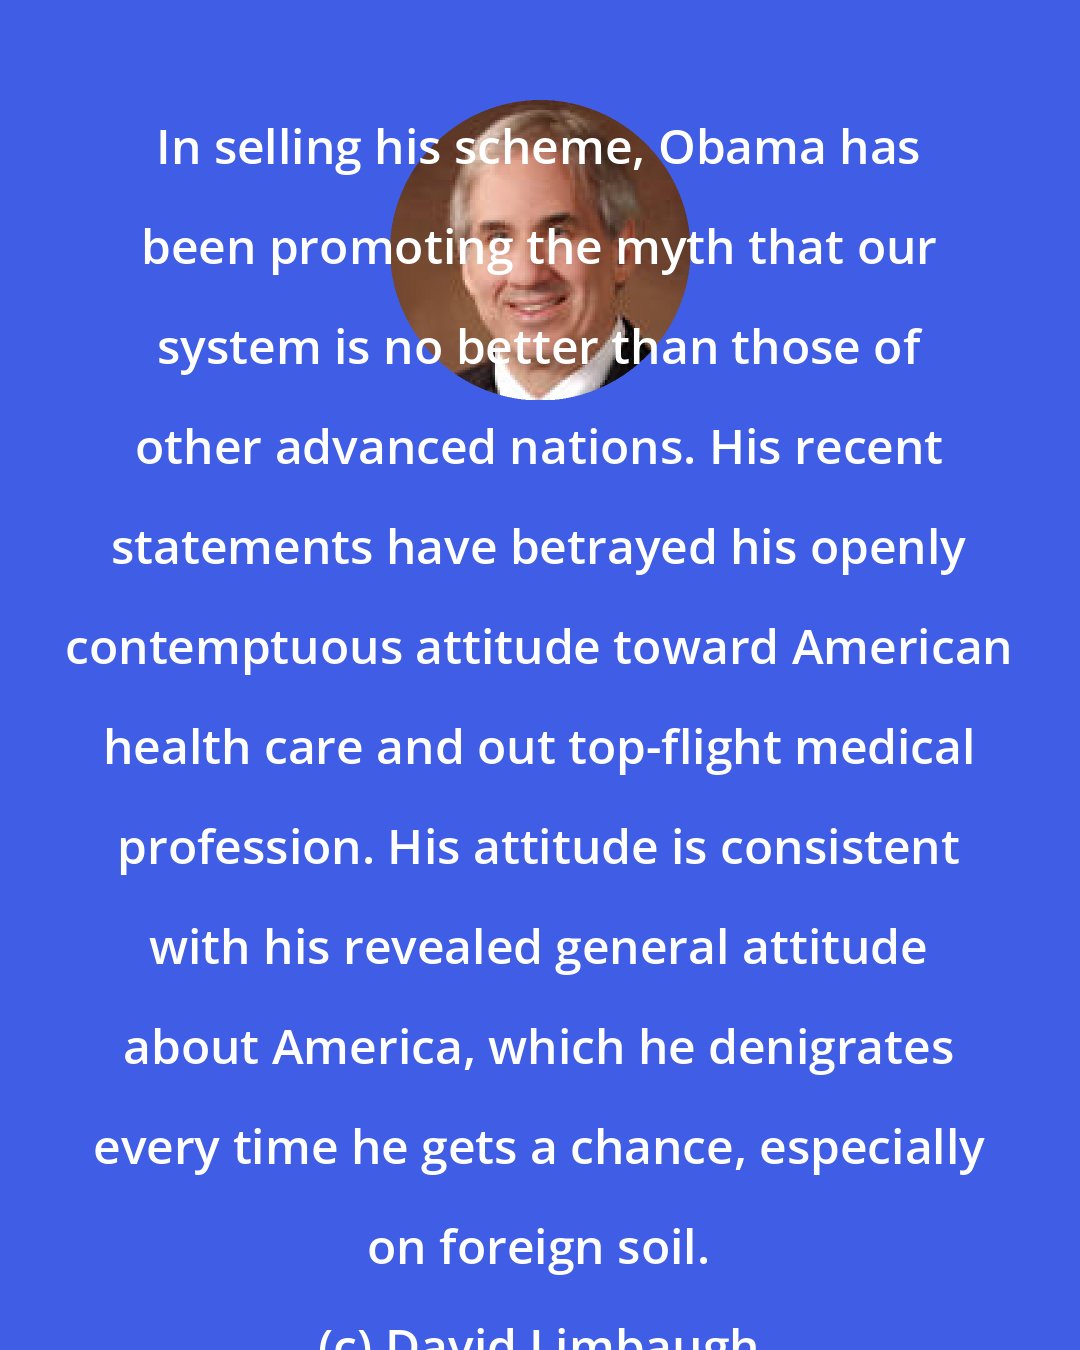 David Limbaugh: In selling his scheme, Obama has been promoting the myth that our system is no better than those of other advanced nations. His recent statements have betrayed his openly contemptuous attitude toward American health care and out top-flight medical profession. His attitude is consistent with his revealed general attitude about America, which he denigrates every time he gets a chance, especially on foreign soil.